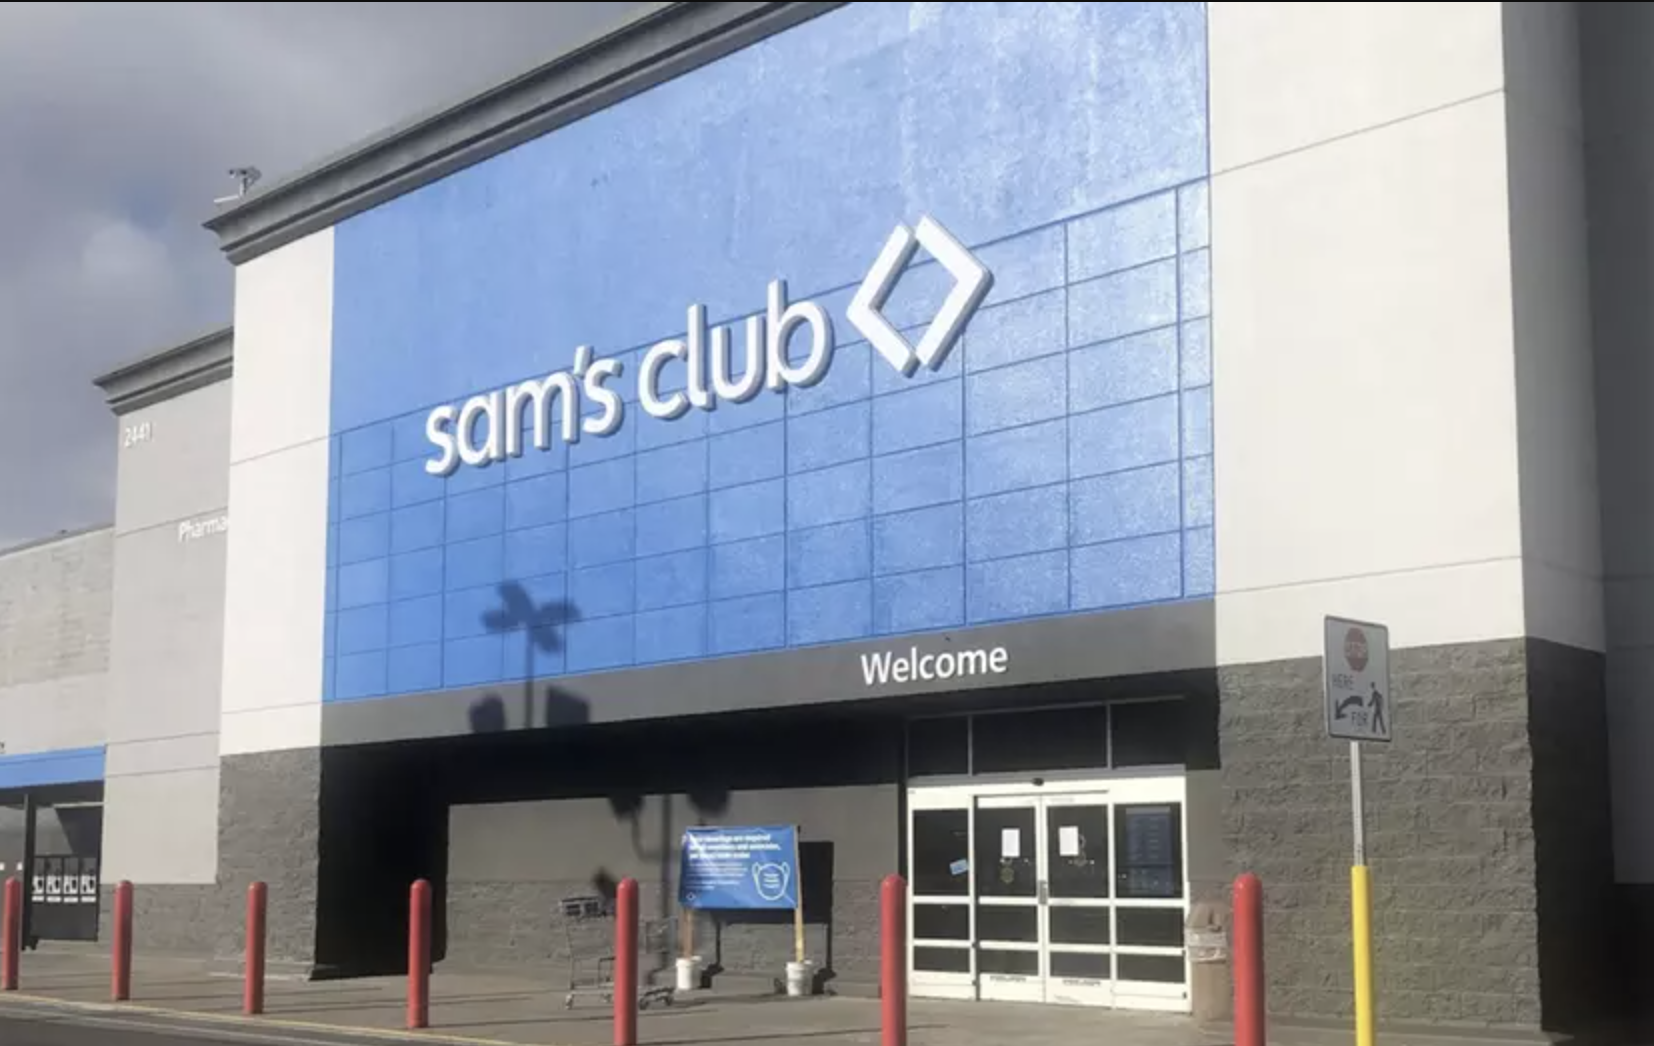 Sam's Clubs offer discounted memberships on 40th anniversary